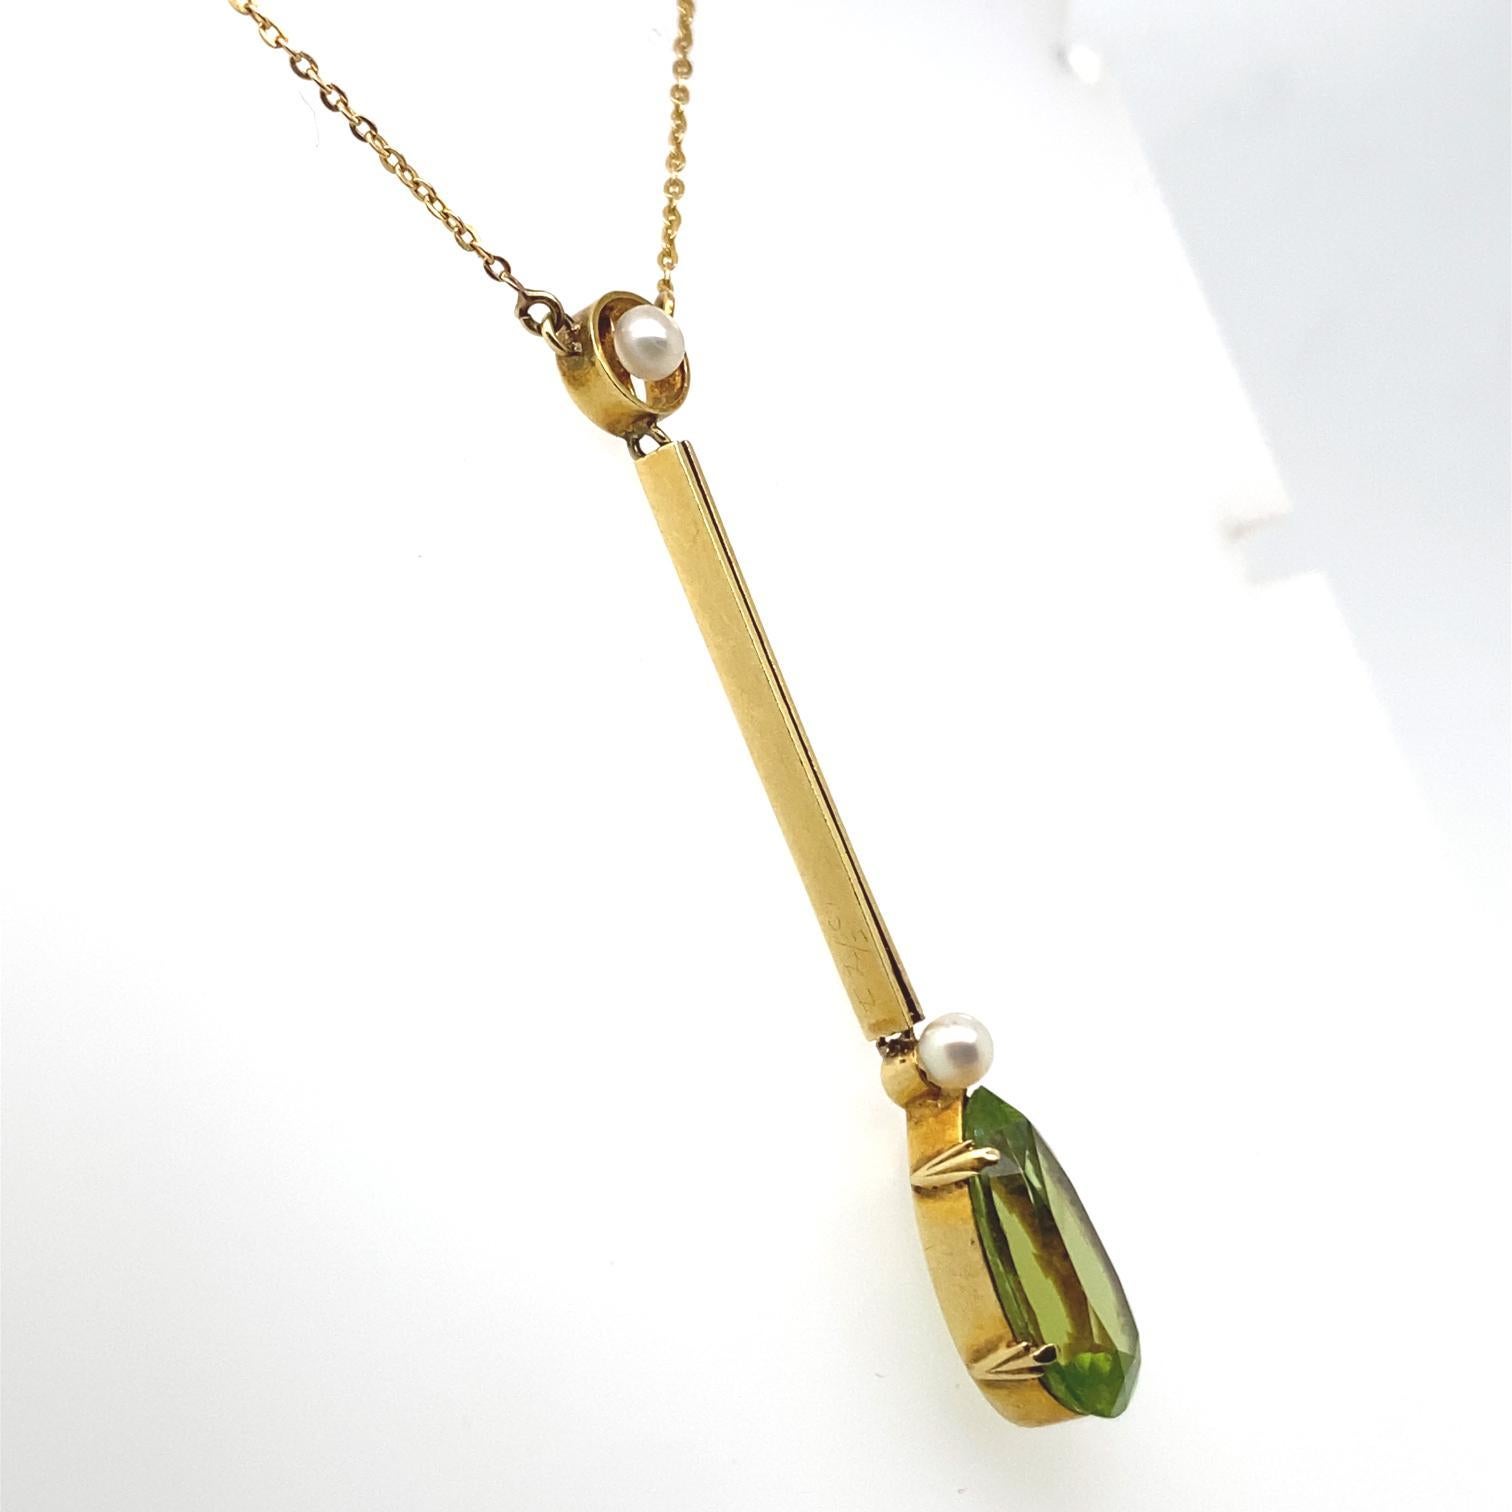 An Edwardian peridot and pearl pendant necklace in 15 karat yellow gold.

This sweet pendant is set to its centre with a seed pearl of 3mm within a 15 karat yellow gold circular frame, from which suspends a lively green pear cut peridot of 2.63